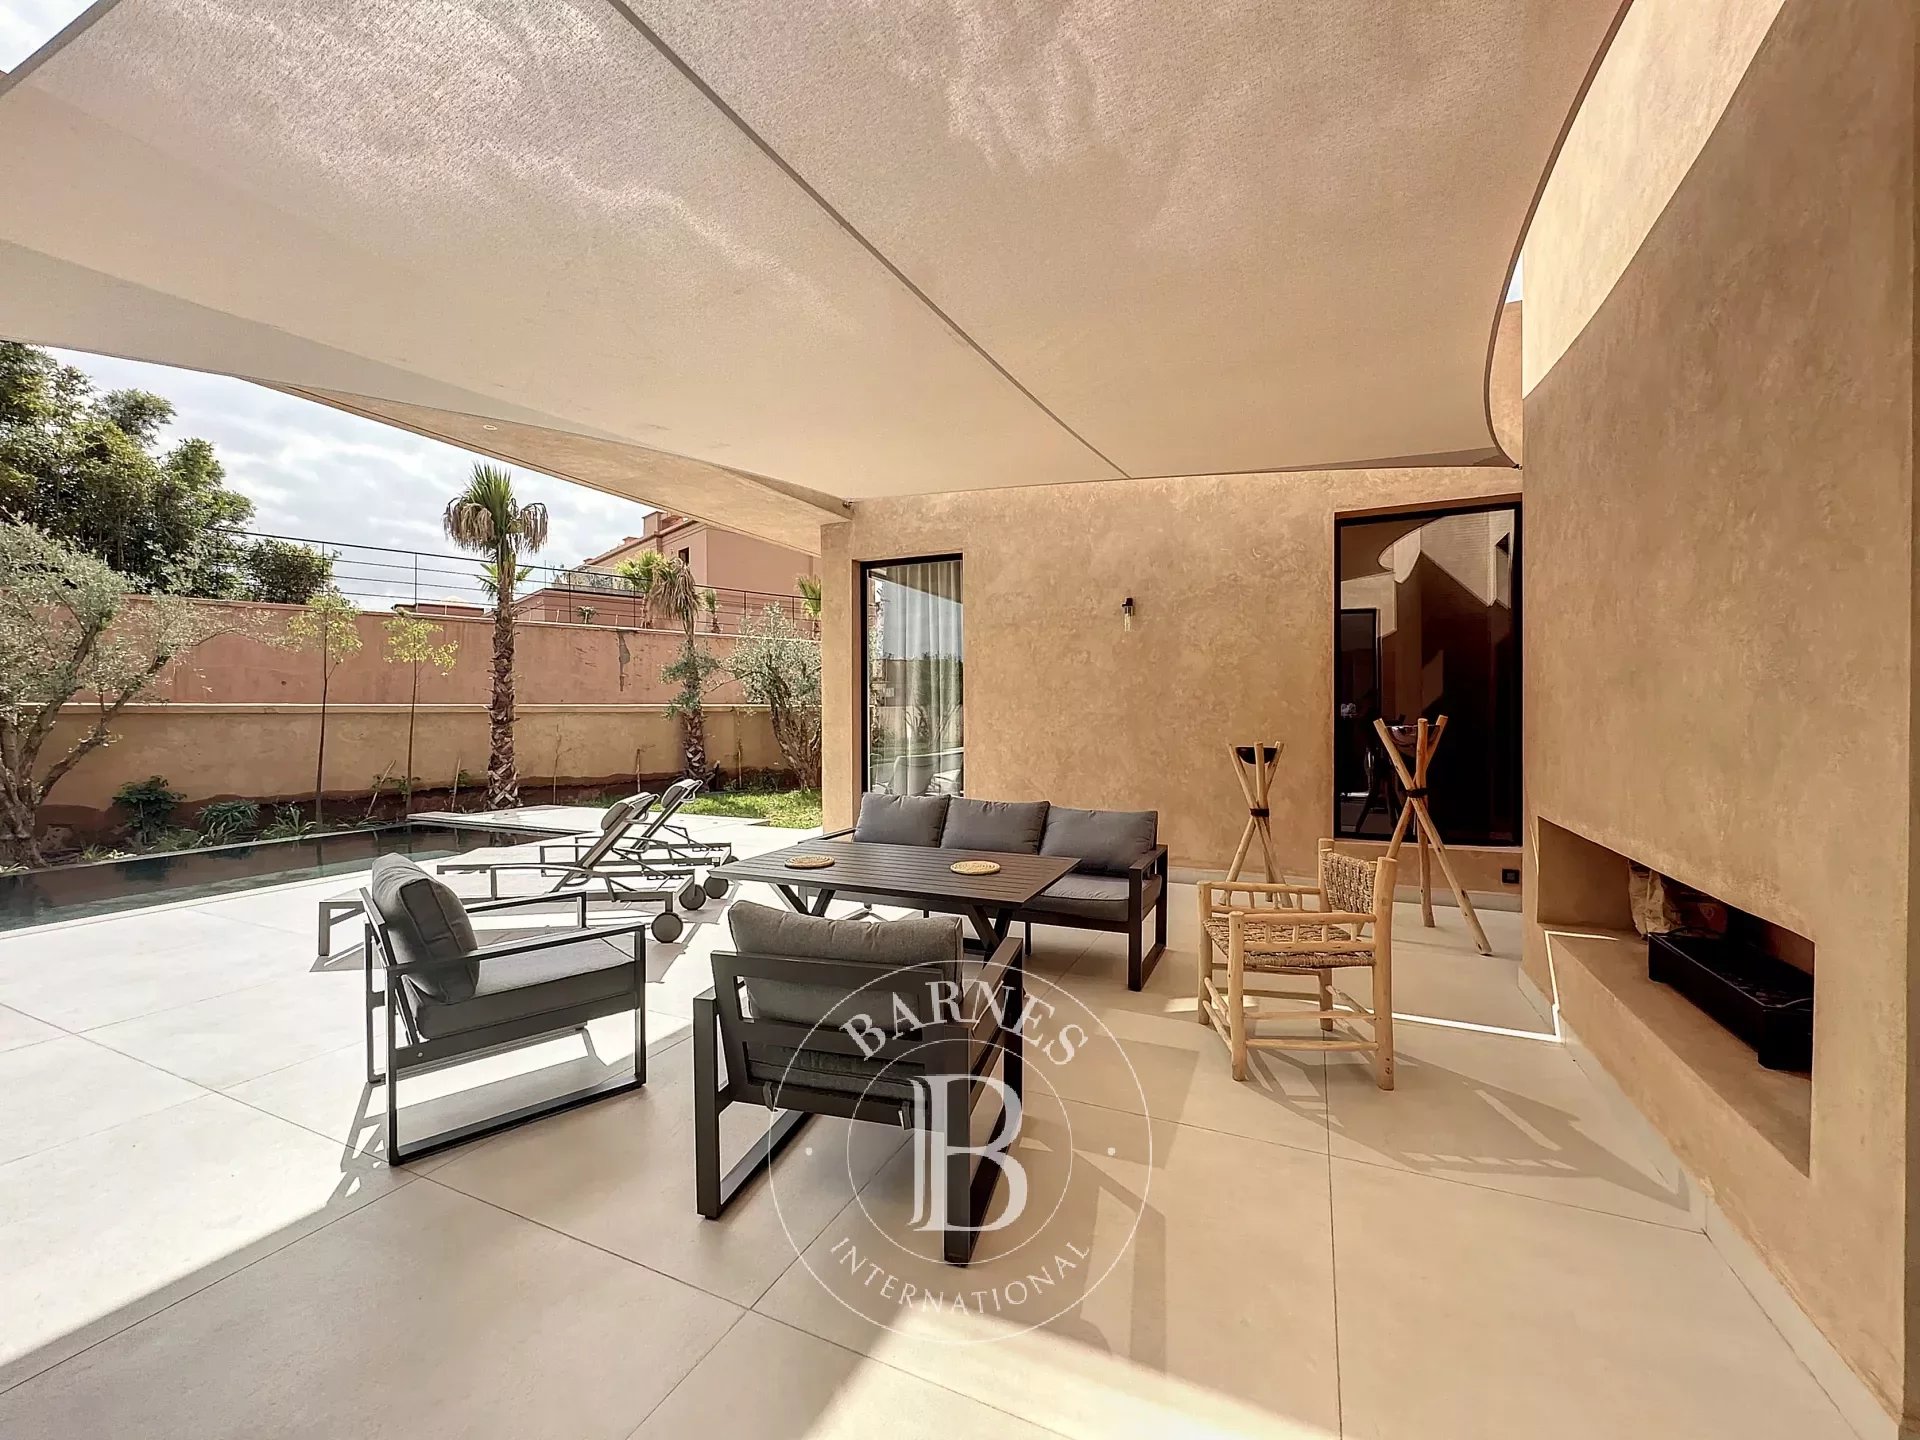 Contemporary house for sale in MARRAKECH - picture 5 title=